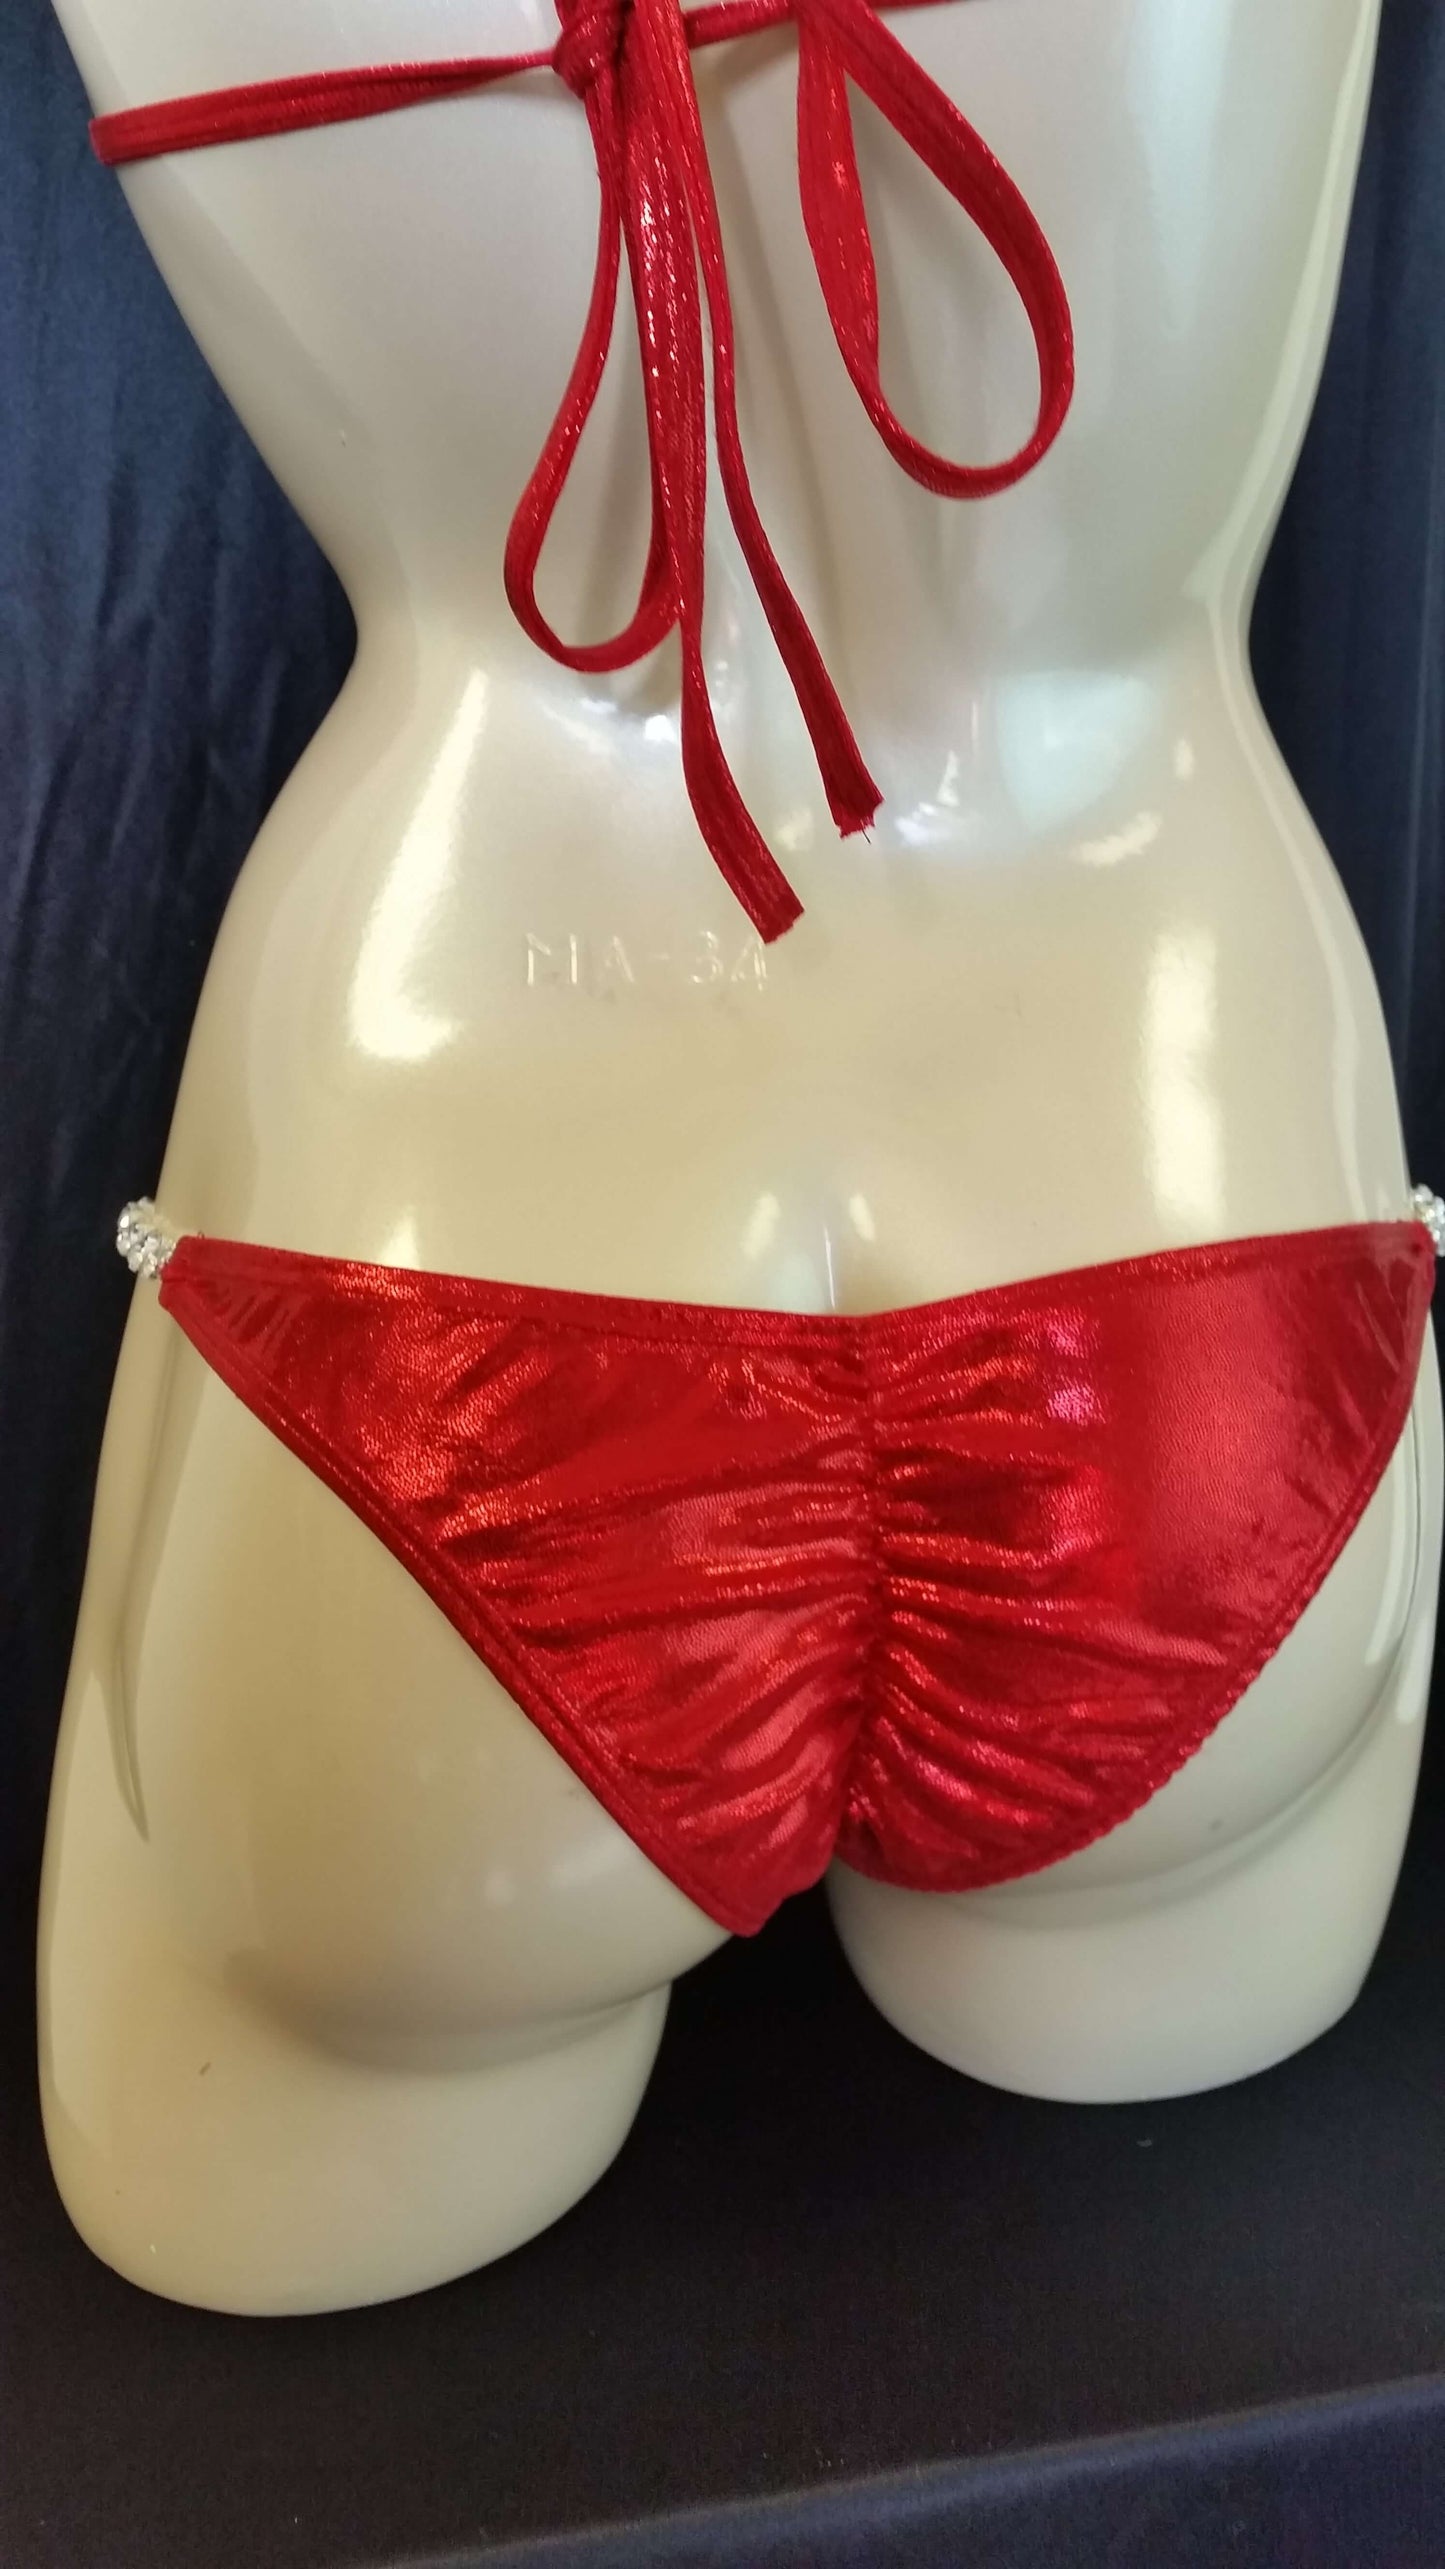 Red bikini with ruby colored rhinestones in a linear pattern design